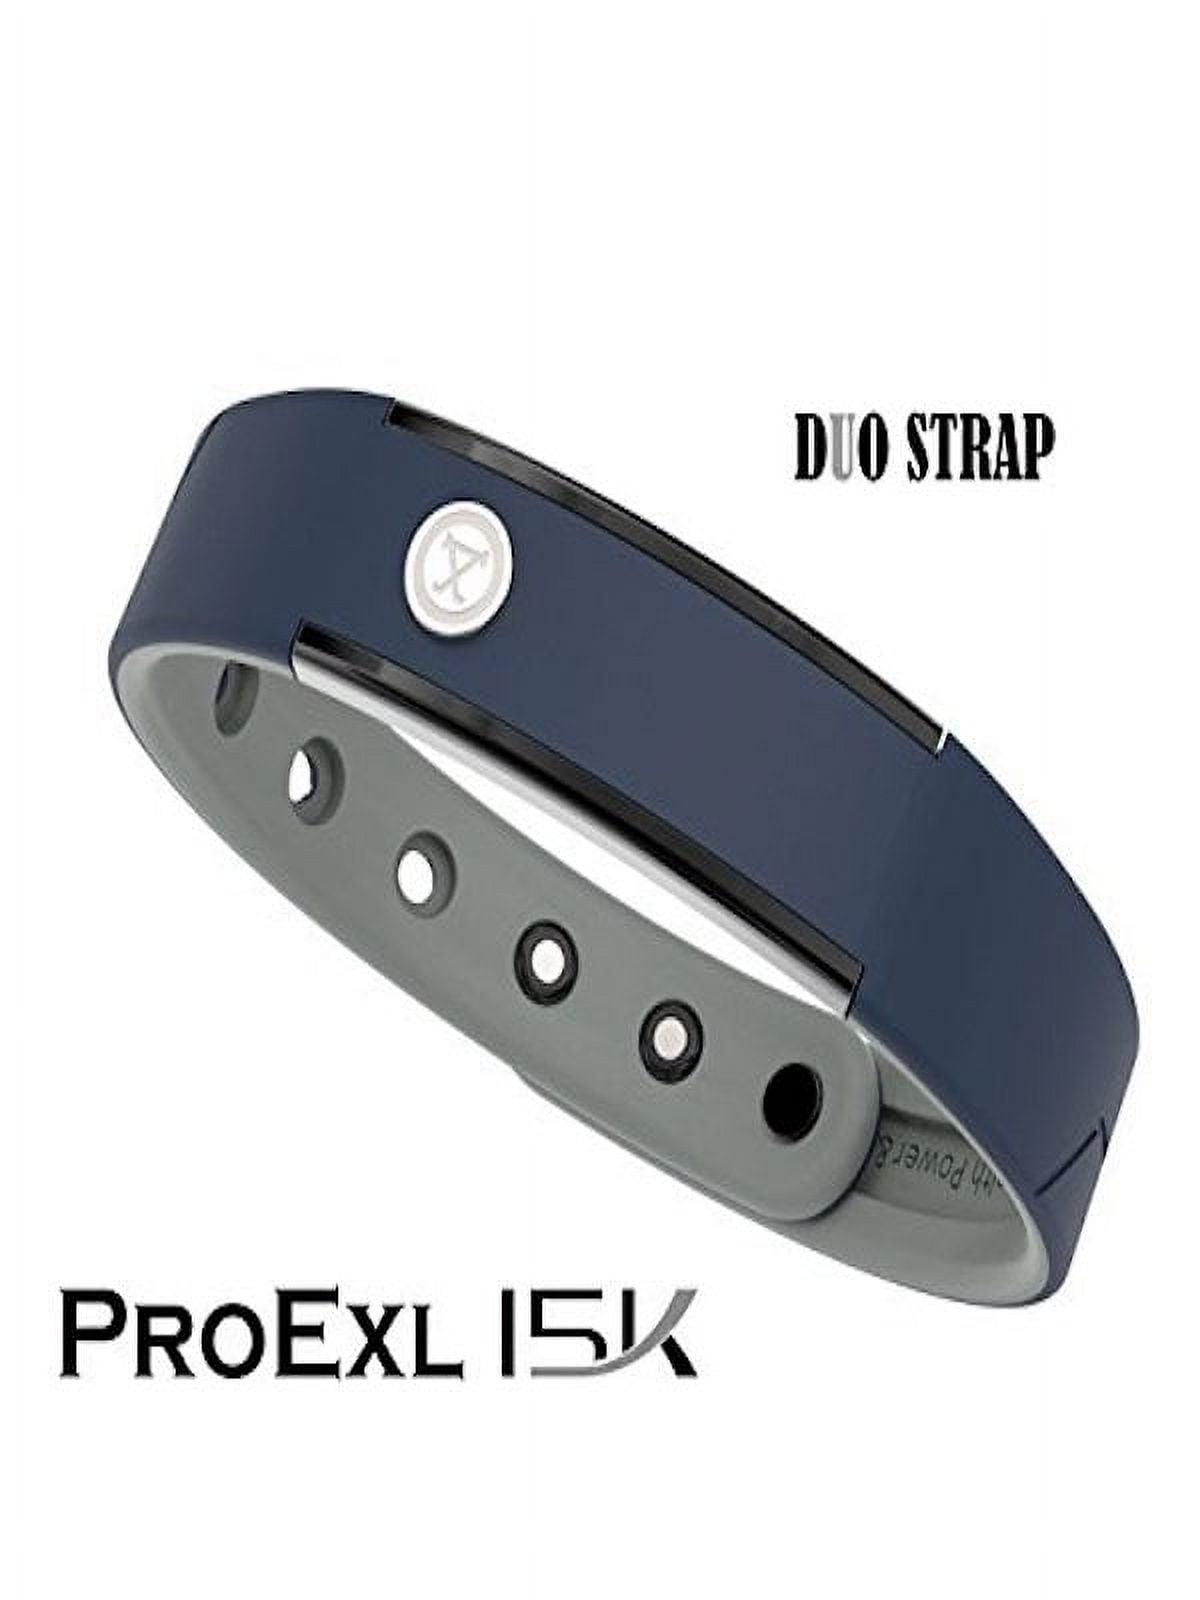 15K Sports Magnetic Bracelet 100% Waterproof and Fully Adjustable - For  Energy, Power and Focus (Black Gray)